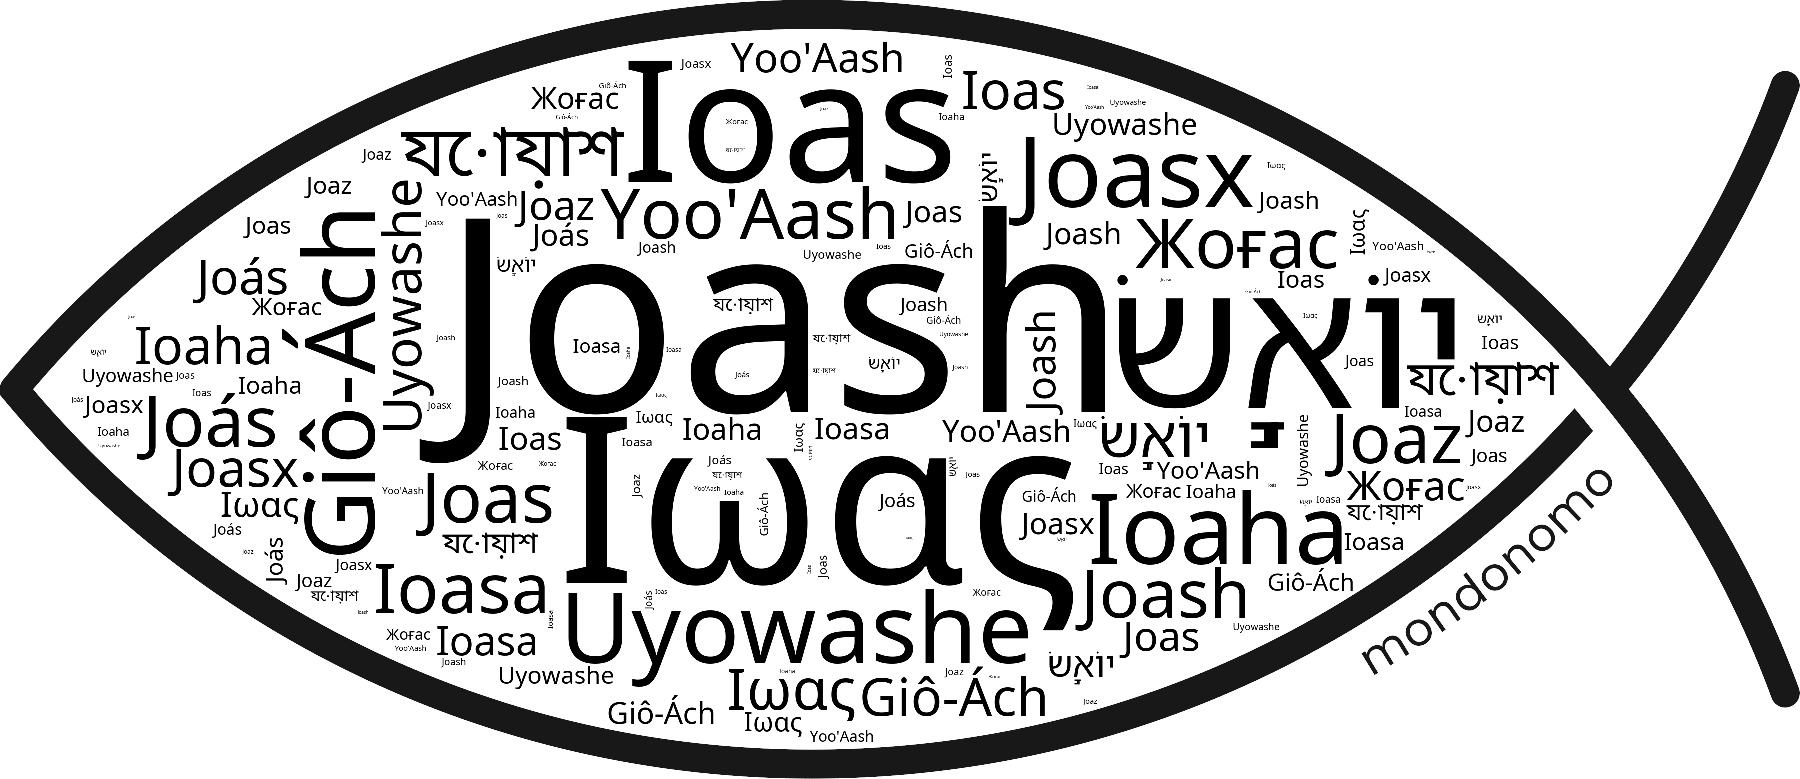 Name Joash in the world's Bibles